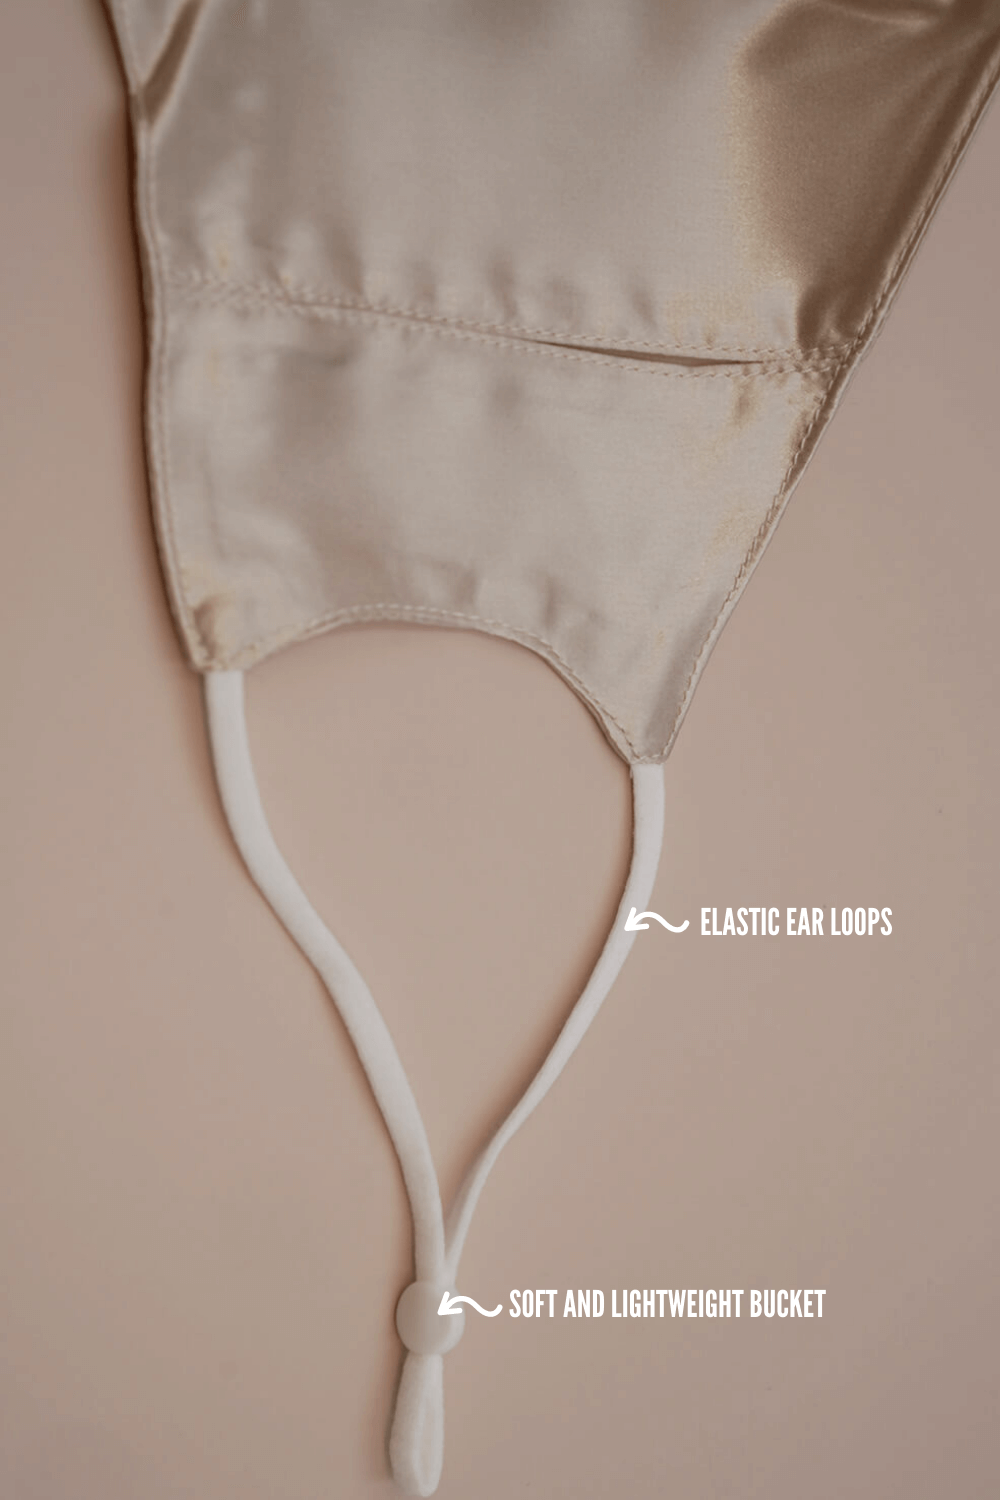 STELLAR Silk Face Mask - Rust (with Nose Wire and Filter Pocket) - BASK™